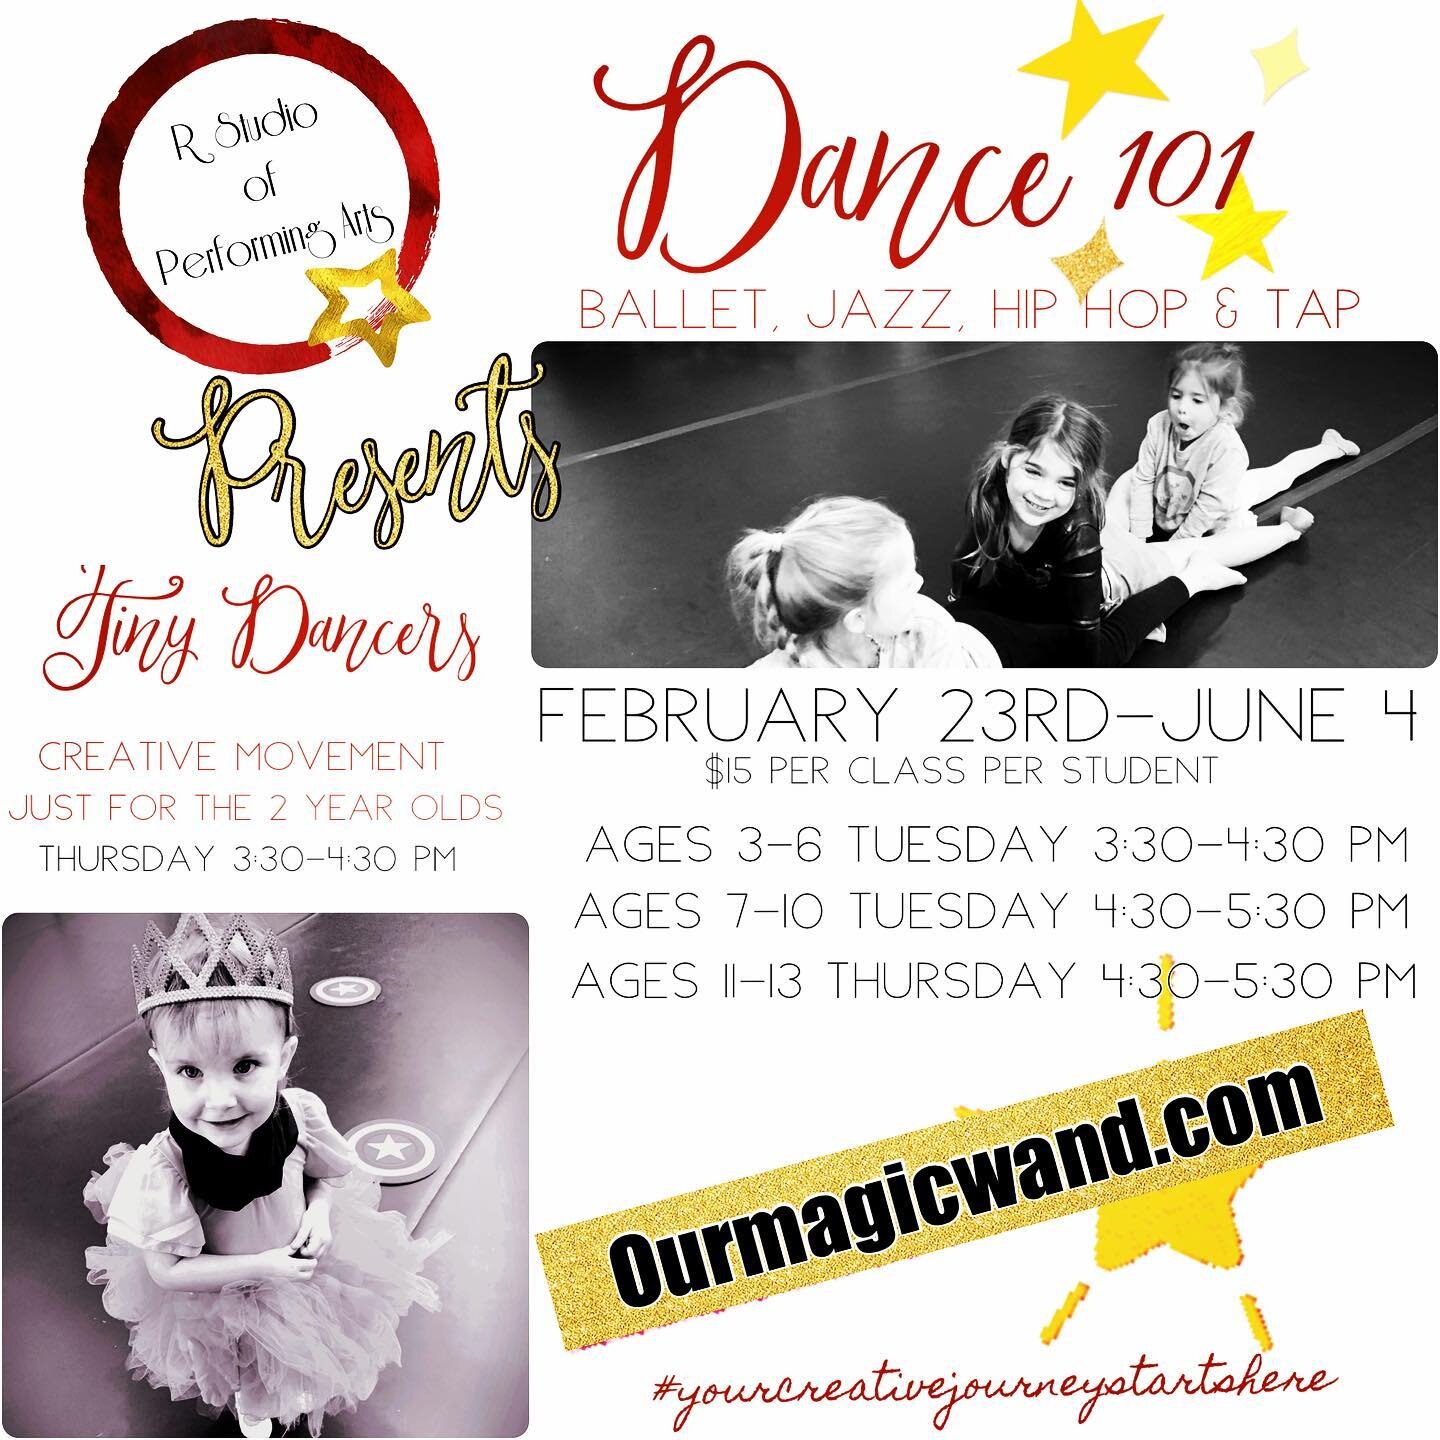 R Studio of Performing Arts Presents Dance 101 and Tiny Dancers! More Info at ourmagicwand.com @rstudioofperformingarts @companyrperformingarts #yourcreativejourneystartshere